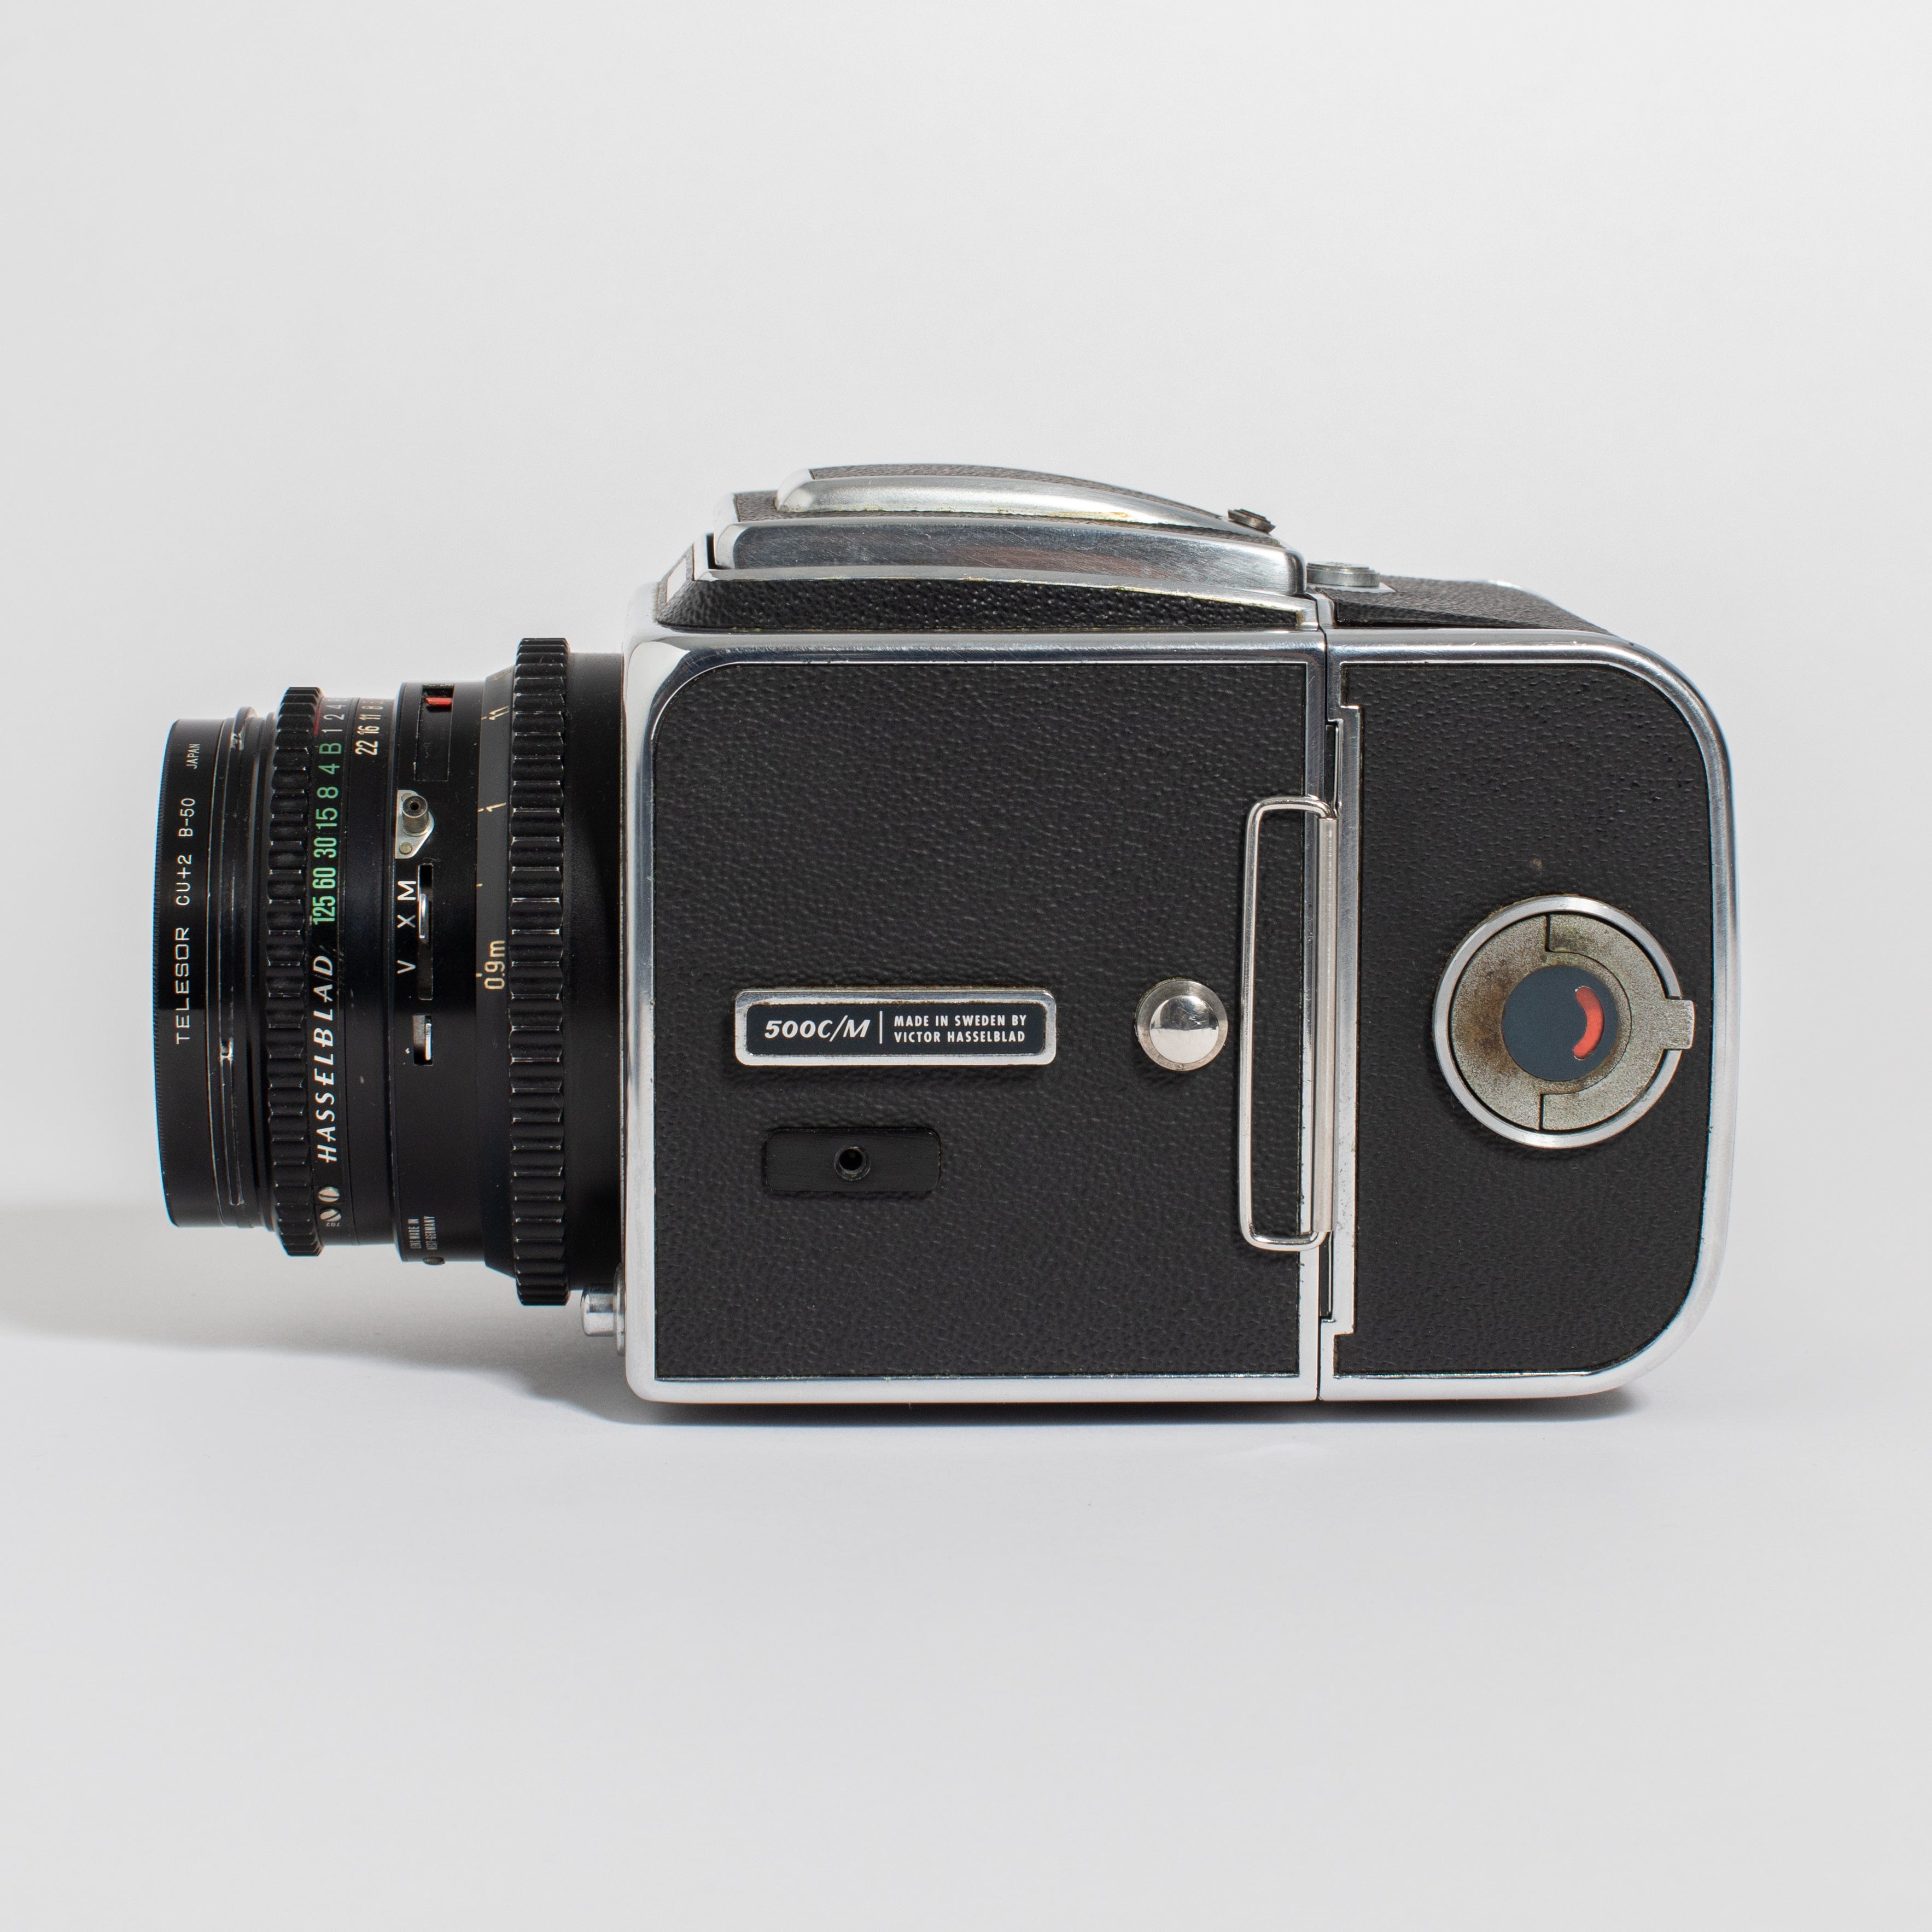 Hasselblad 500 C/M with Zeiss Planar Synchro Compur 80mm f/2.8 